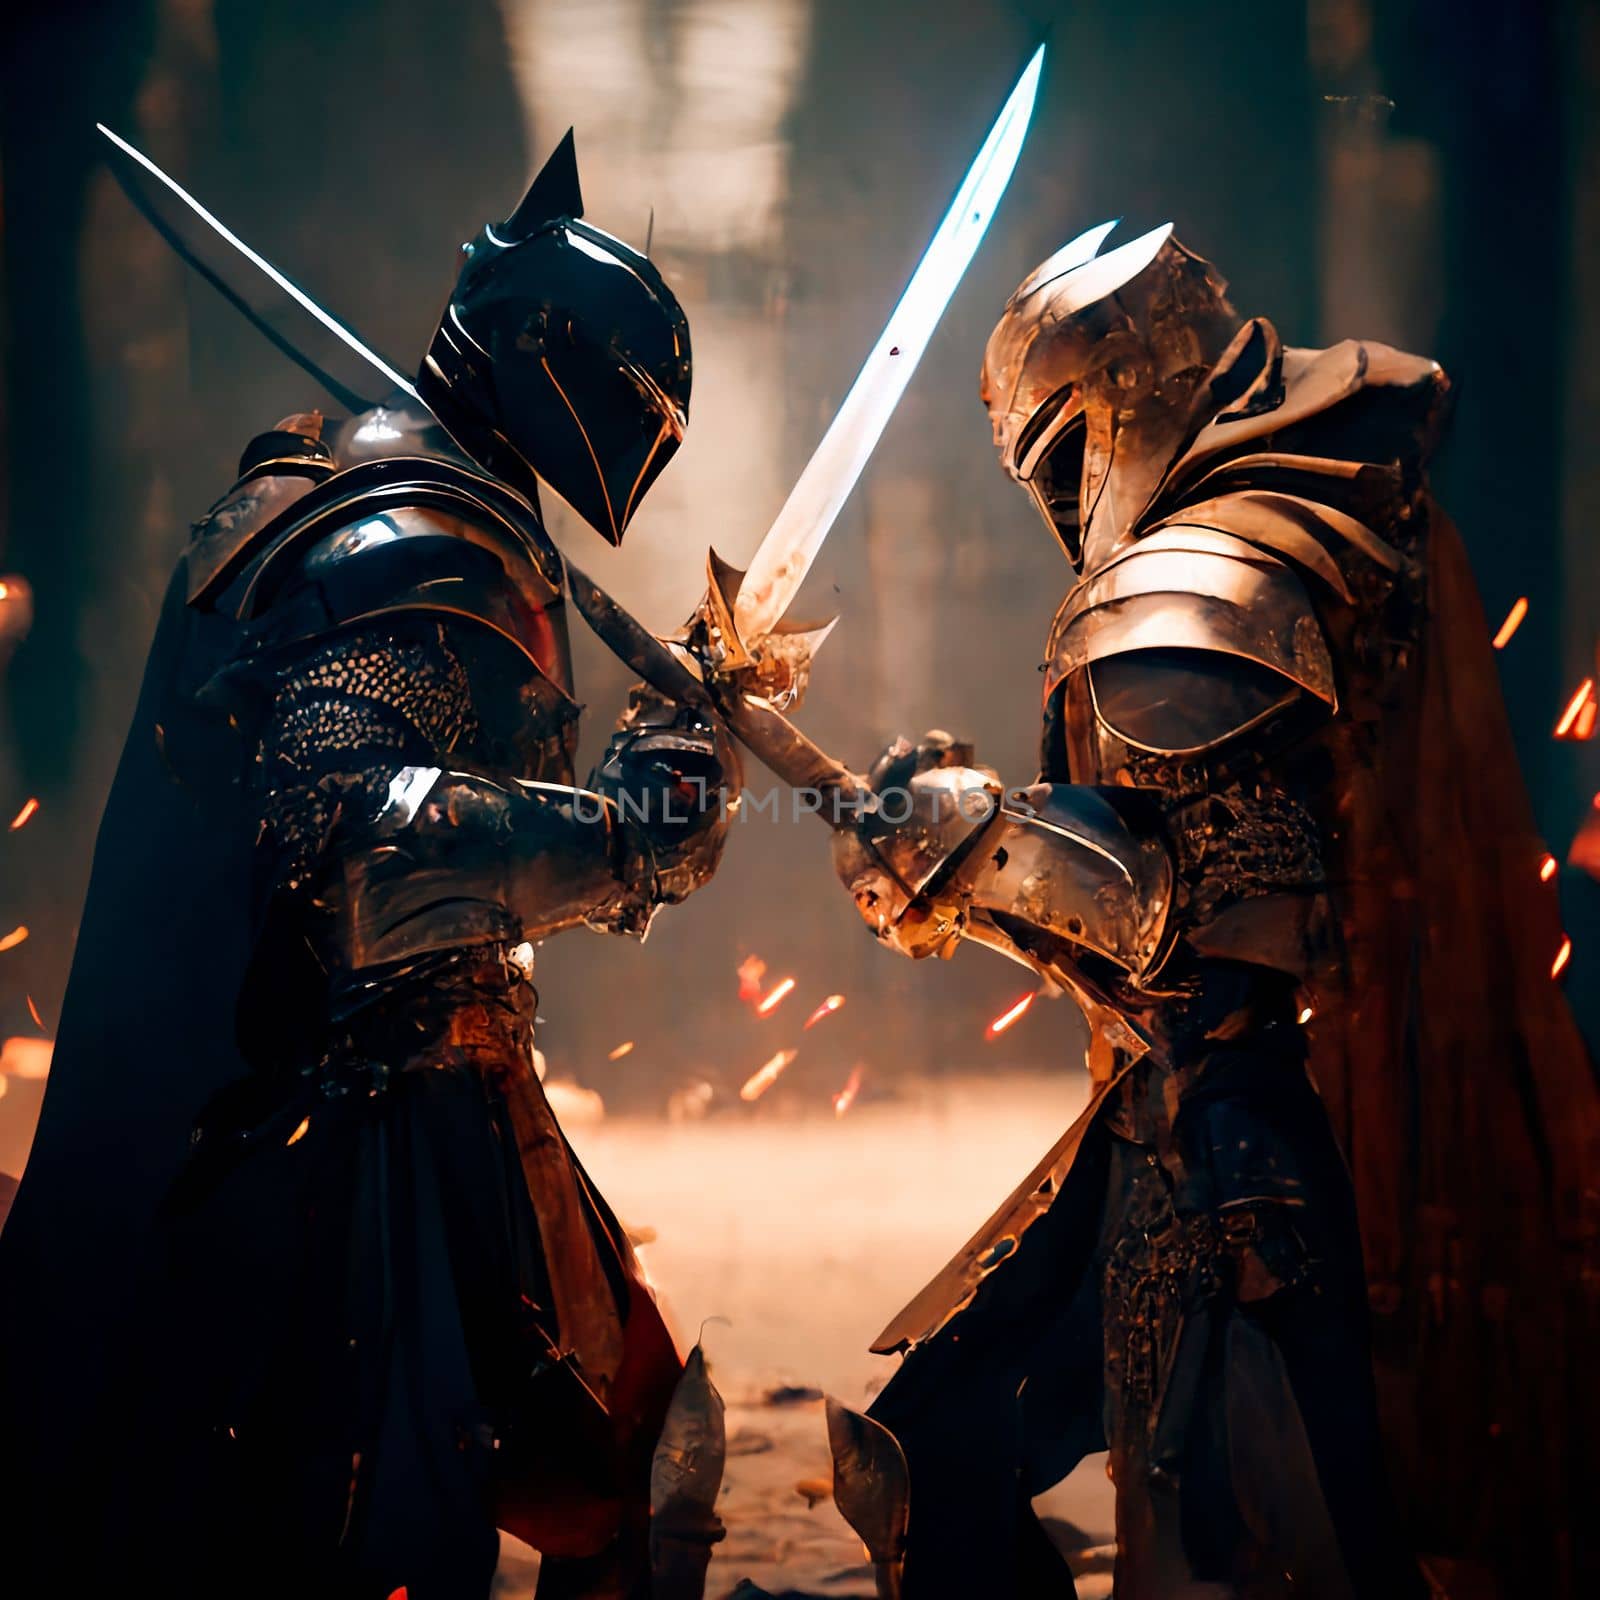 epic cinematic battle of two warriors in armor. High quality illustration